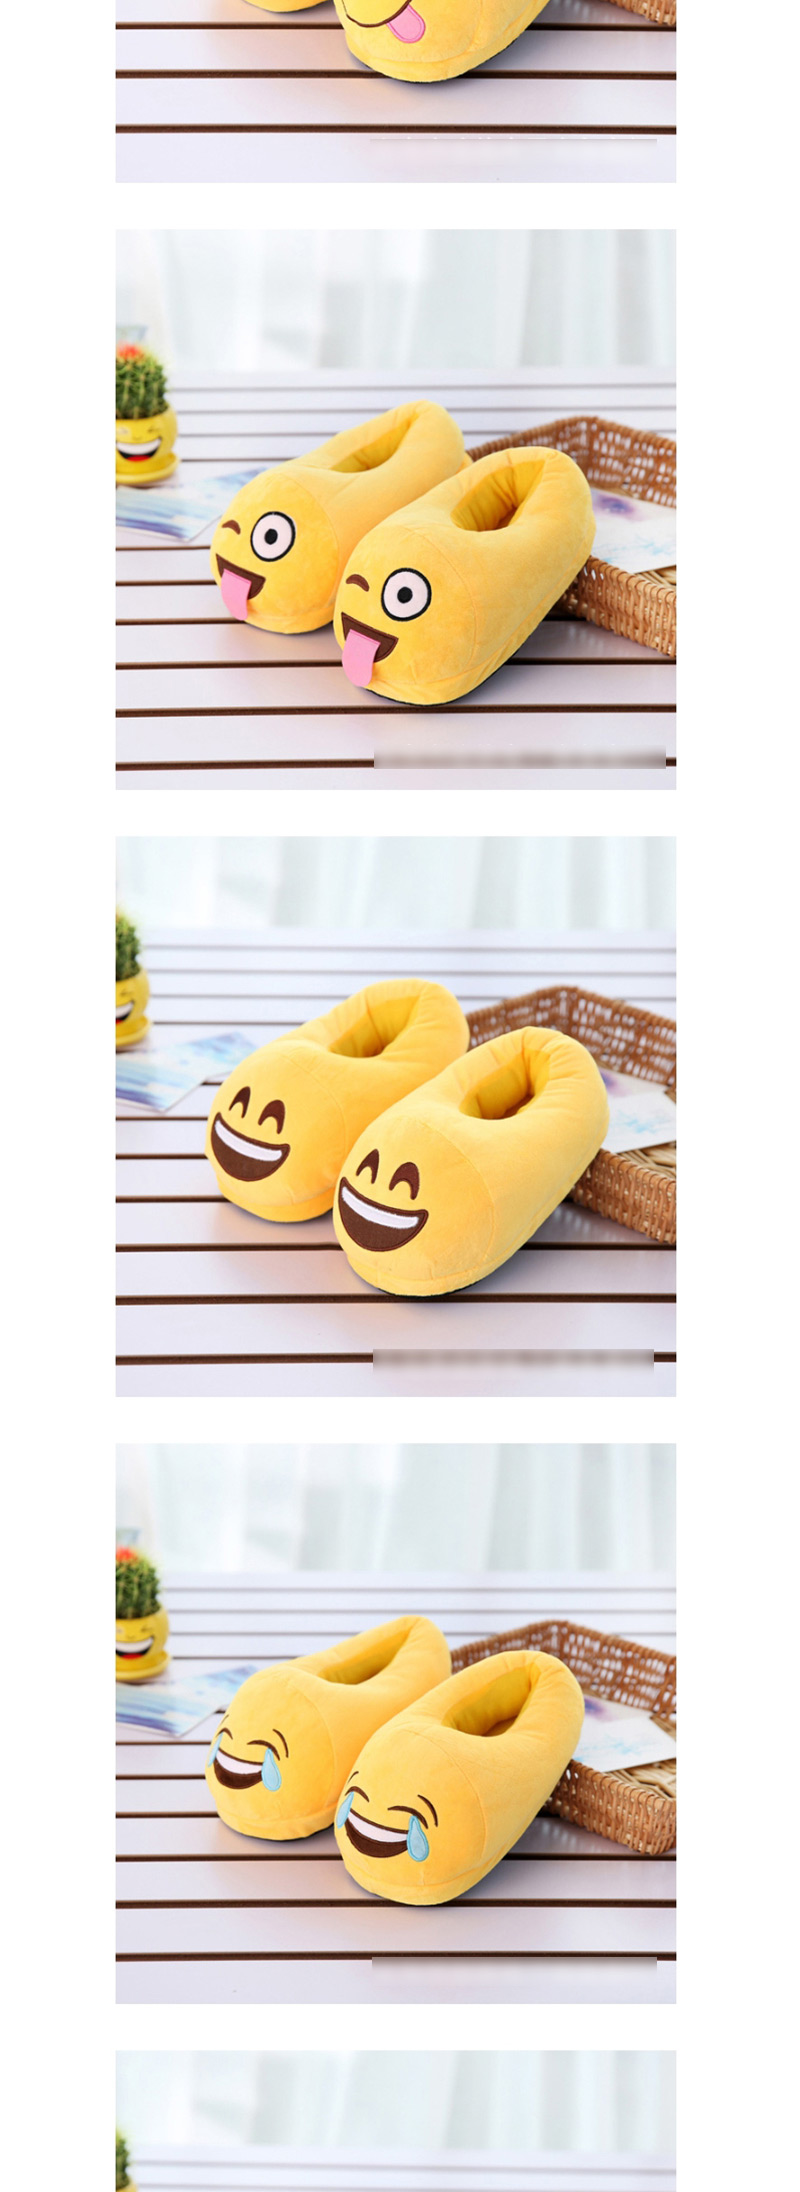 Fashion 5 Yellow Tongue Out Cartoon Expression Plush Bag With Cotton Slippers,Slippers